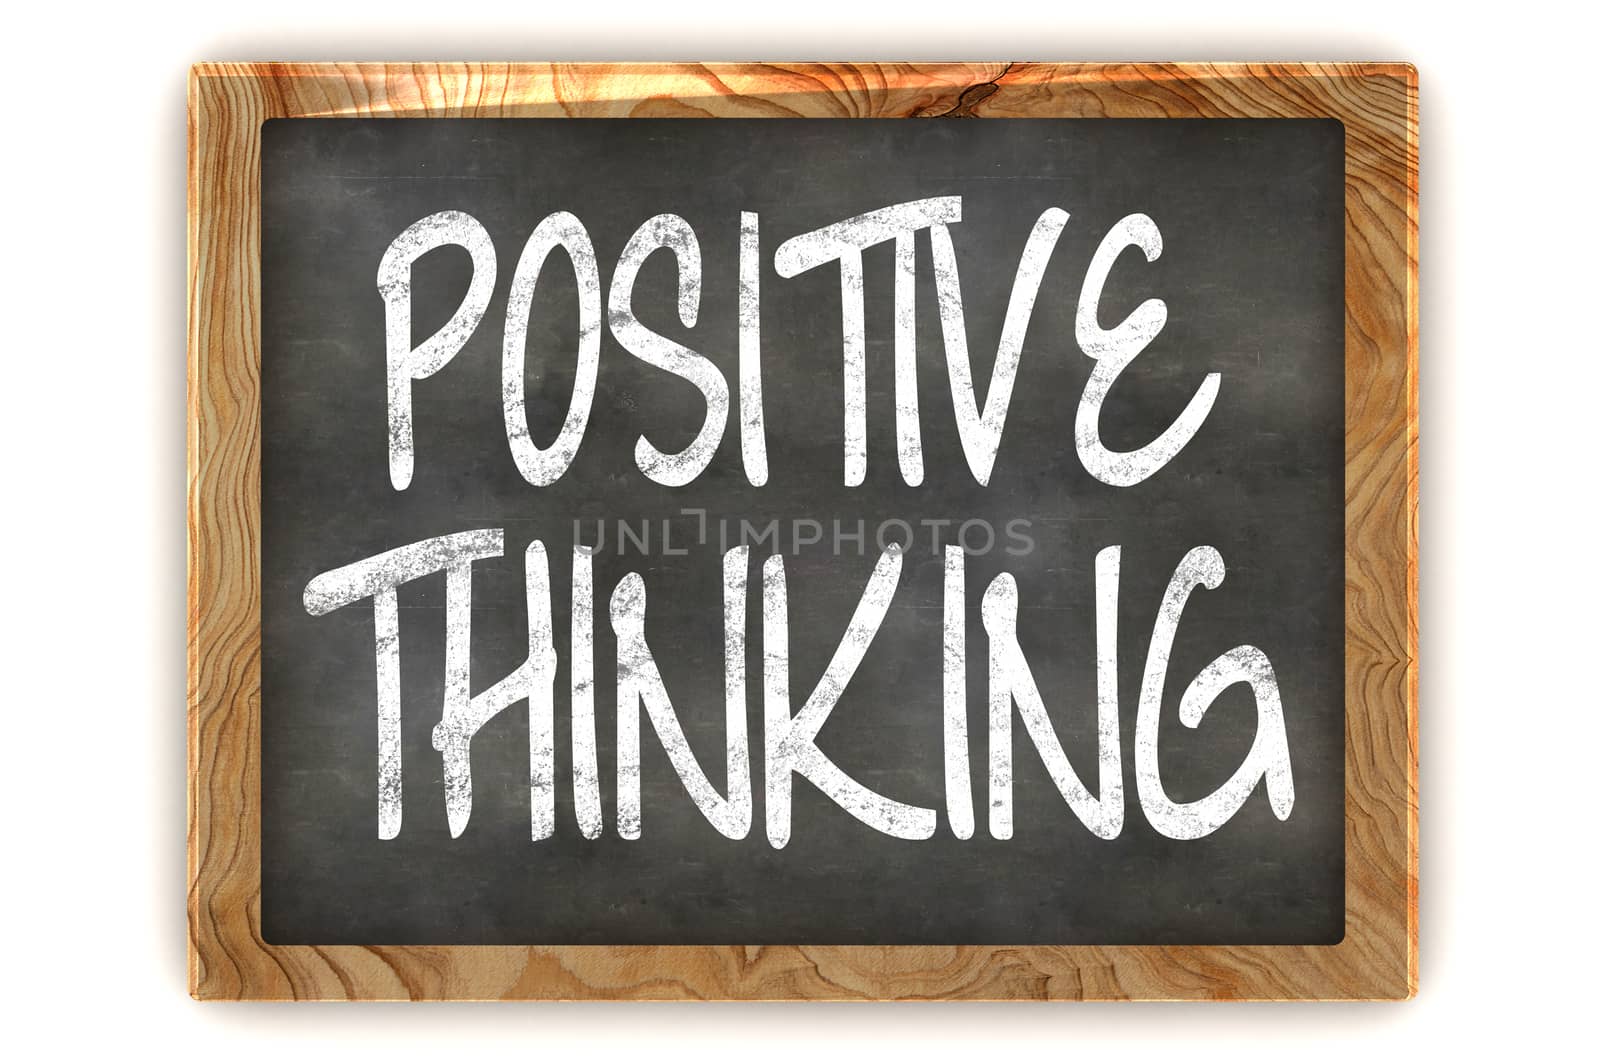 A Colourful 3d Rendered Blackboard showing the Inspirational Message "Positive Thinking"